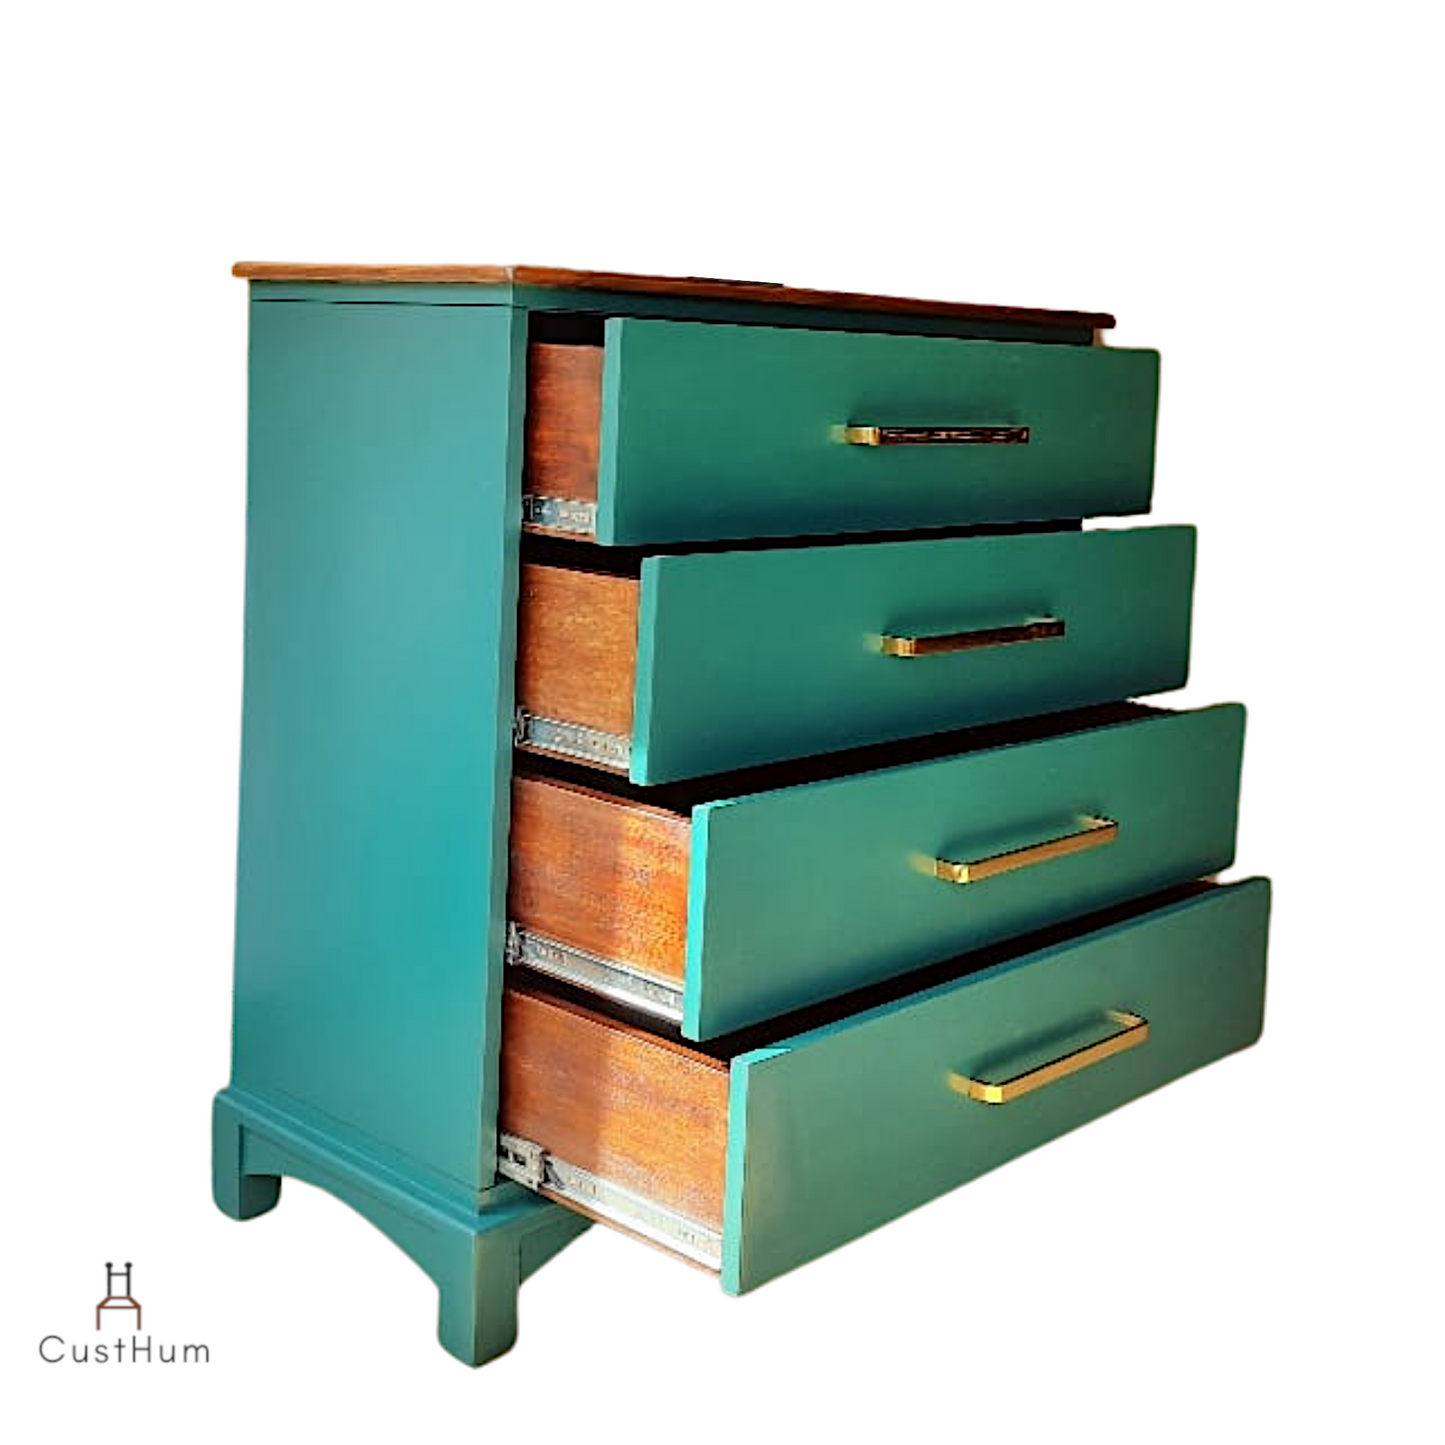 CustHum Verdure-vintage modern chest of drawers in duck plume green color and with sleek brass coated handles (ISO, open)